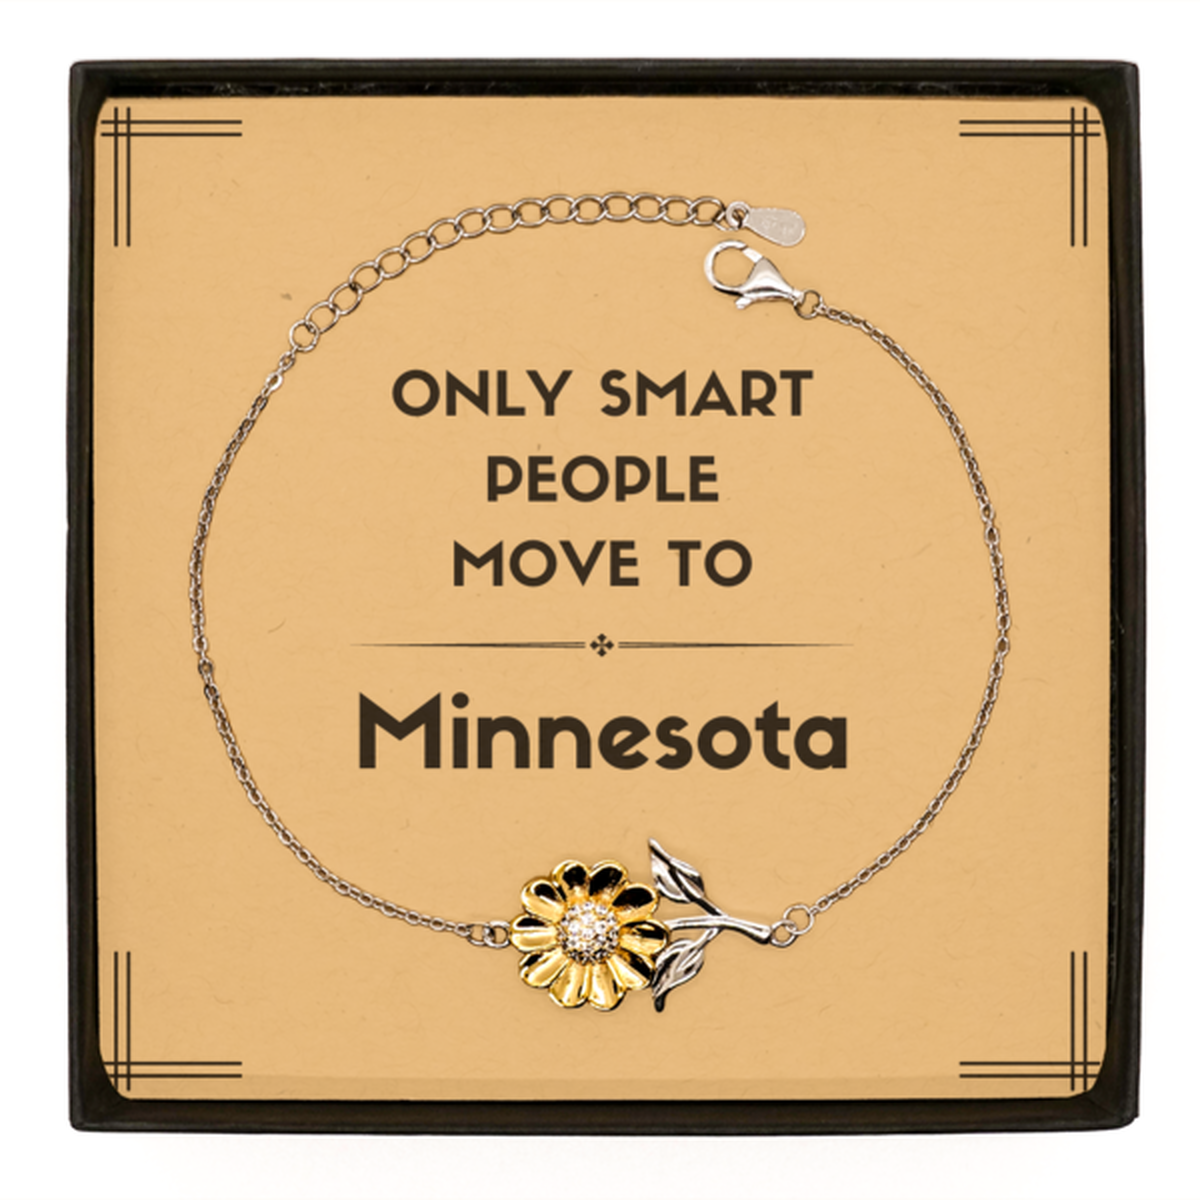 Only smart people move to Minnesota Sunflower Bracelet, Message Card Gifts For Minnesota, Move to Minnesota Gifts for Friends Coworker Funny Saying Quote